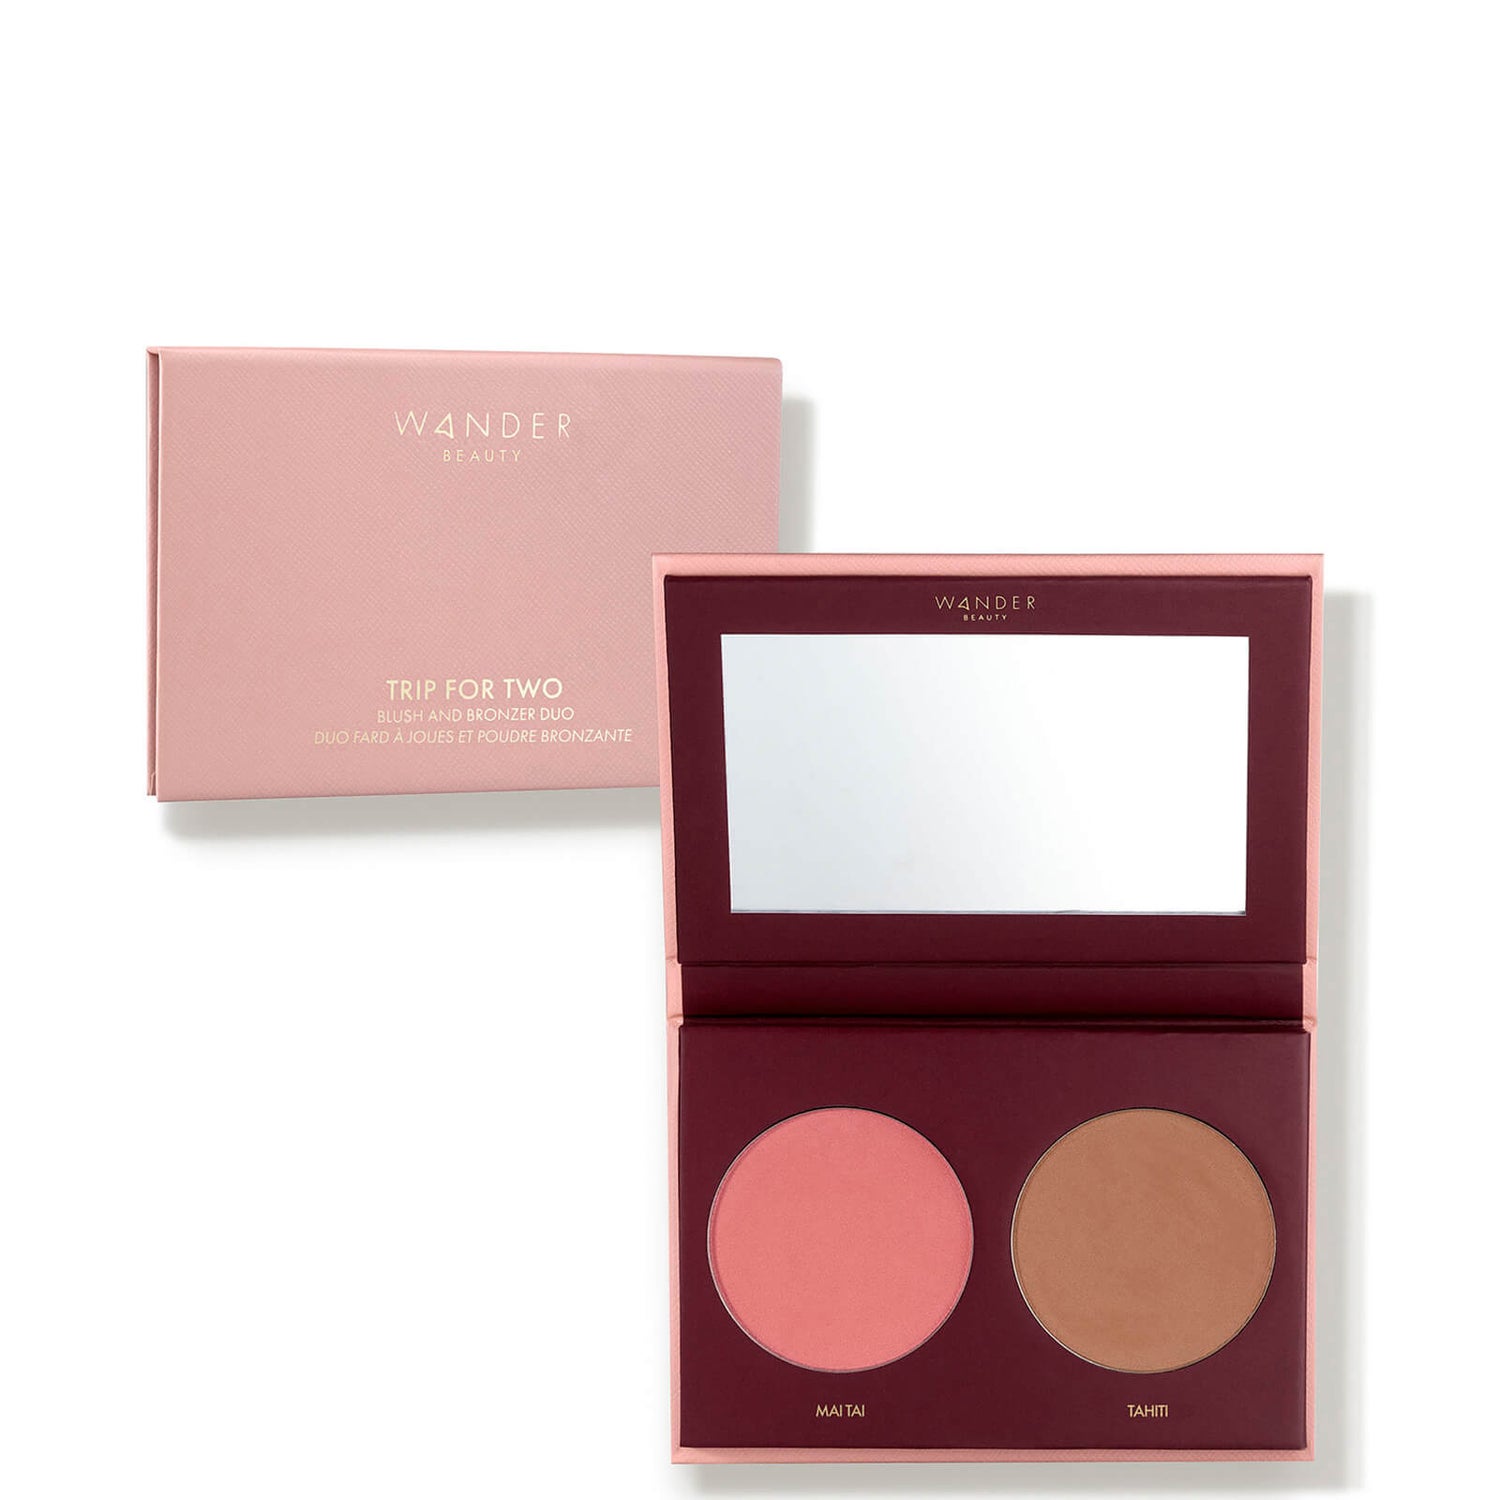 Wander Beauty Trip for Two Blush and Bronzer Duo (1 piece)